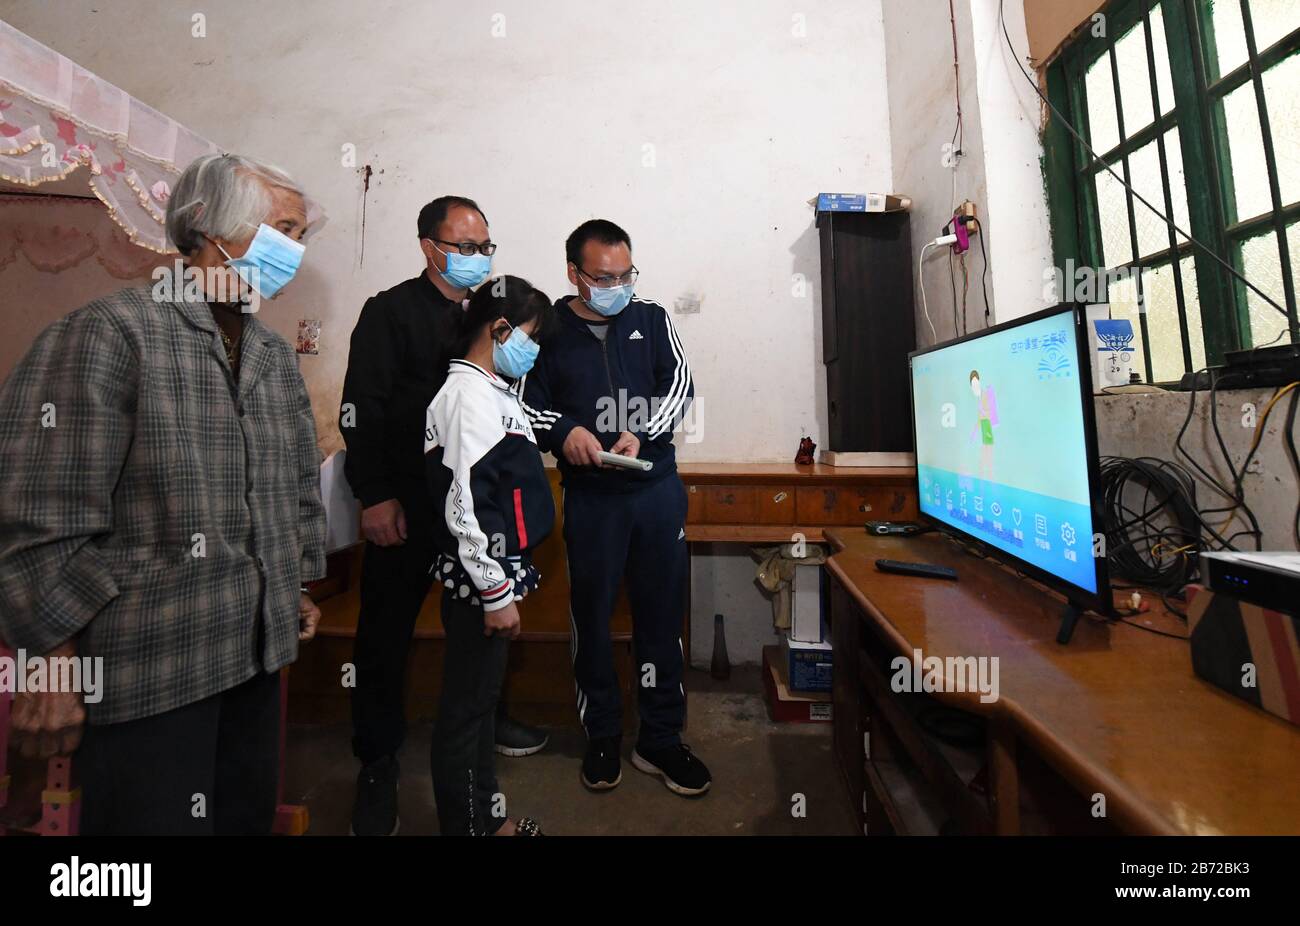 (200313) -- BEIJING, March 13, 2020 (Xinhua) -- Teachers instruct student Huang Yujuan (2nd R) to use online class system on TV at Taiping Town, Wuming District of Nanning City, south China's Guangxi Zhuang Autonomous Region, March 12, 2020. Due to the novel coronavirus outbreak, the new semester has been suspended and students have online classes at home. Given the fact that some poverty-stricken households cannot afford the facilities for online classes, authorities have installed facilities to help the impoverished students learn via online classes. (Xinhua/Lu Boan) Stock Photo